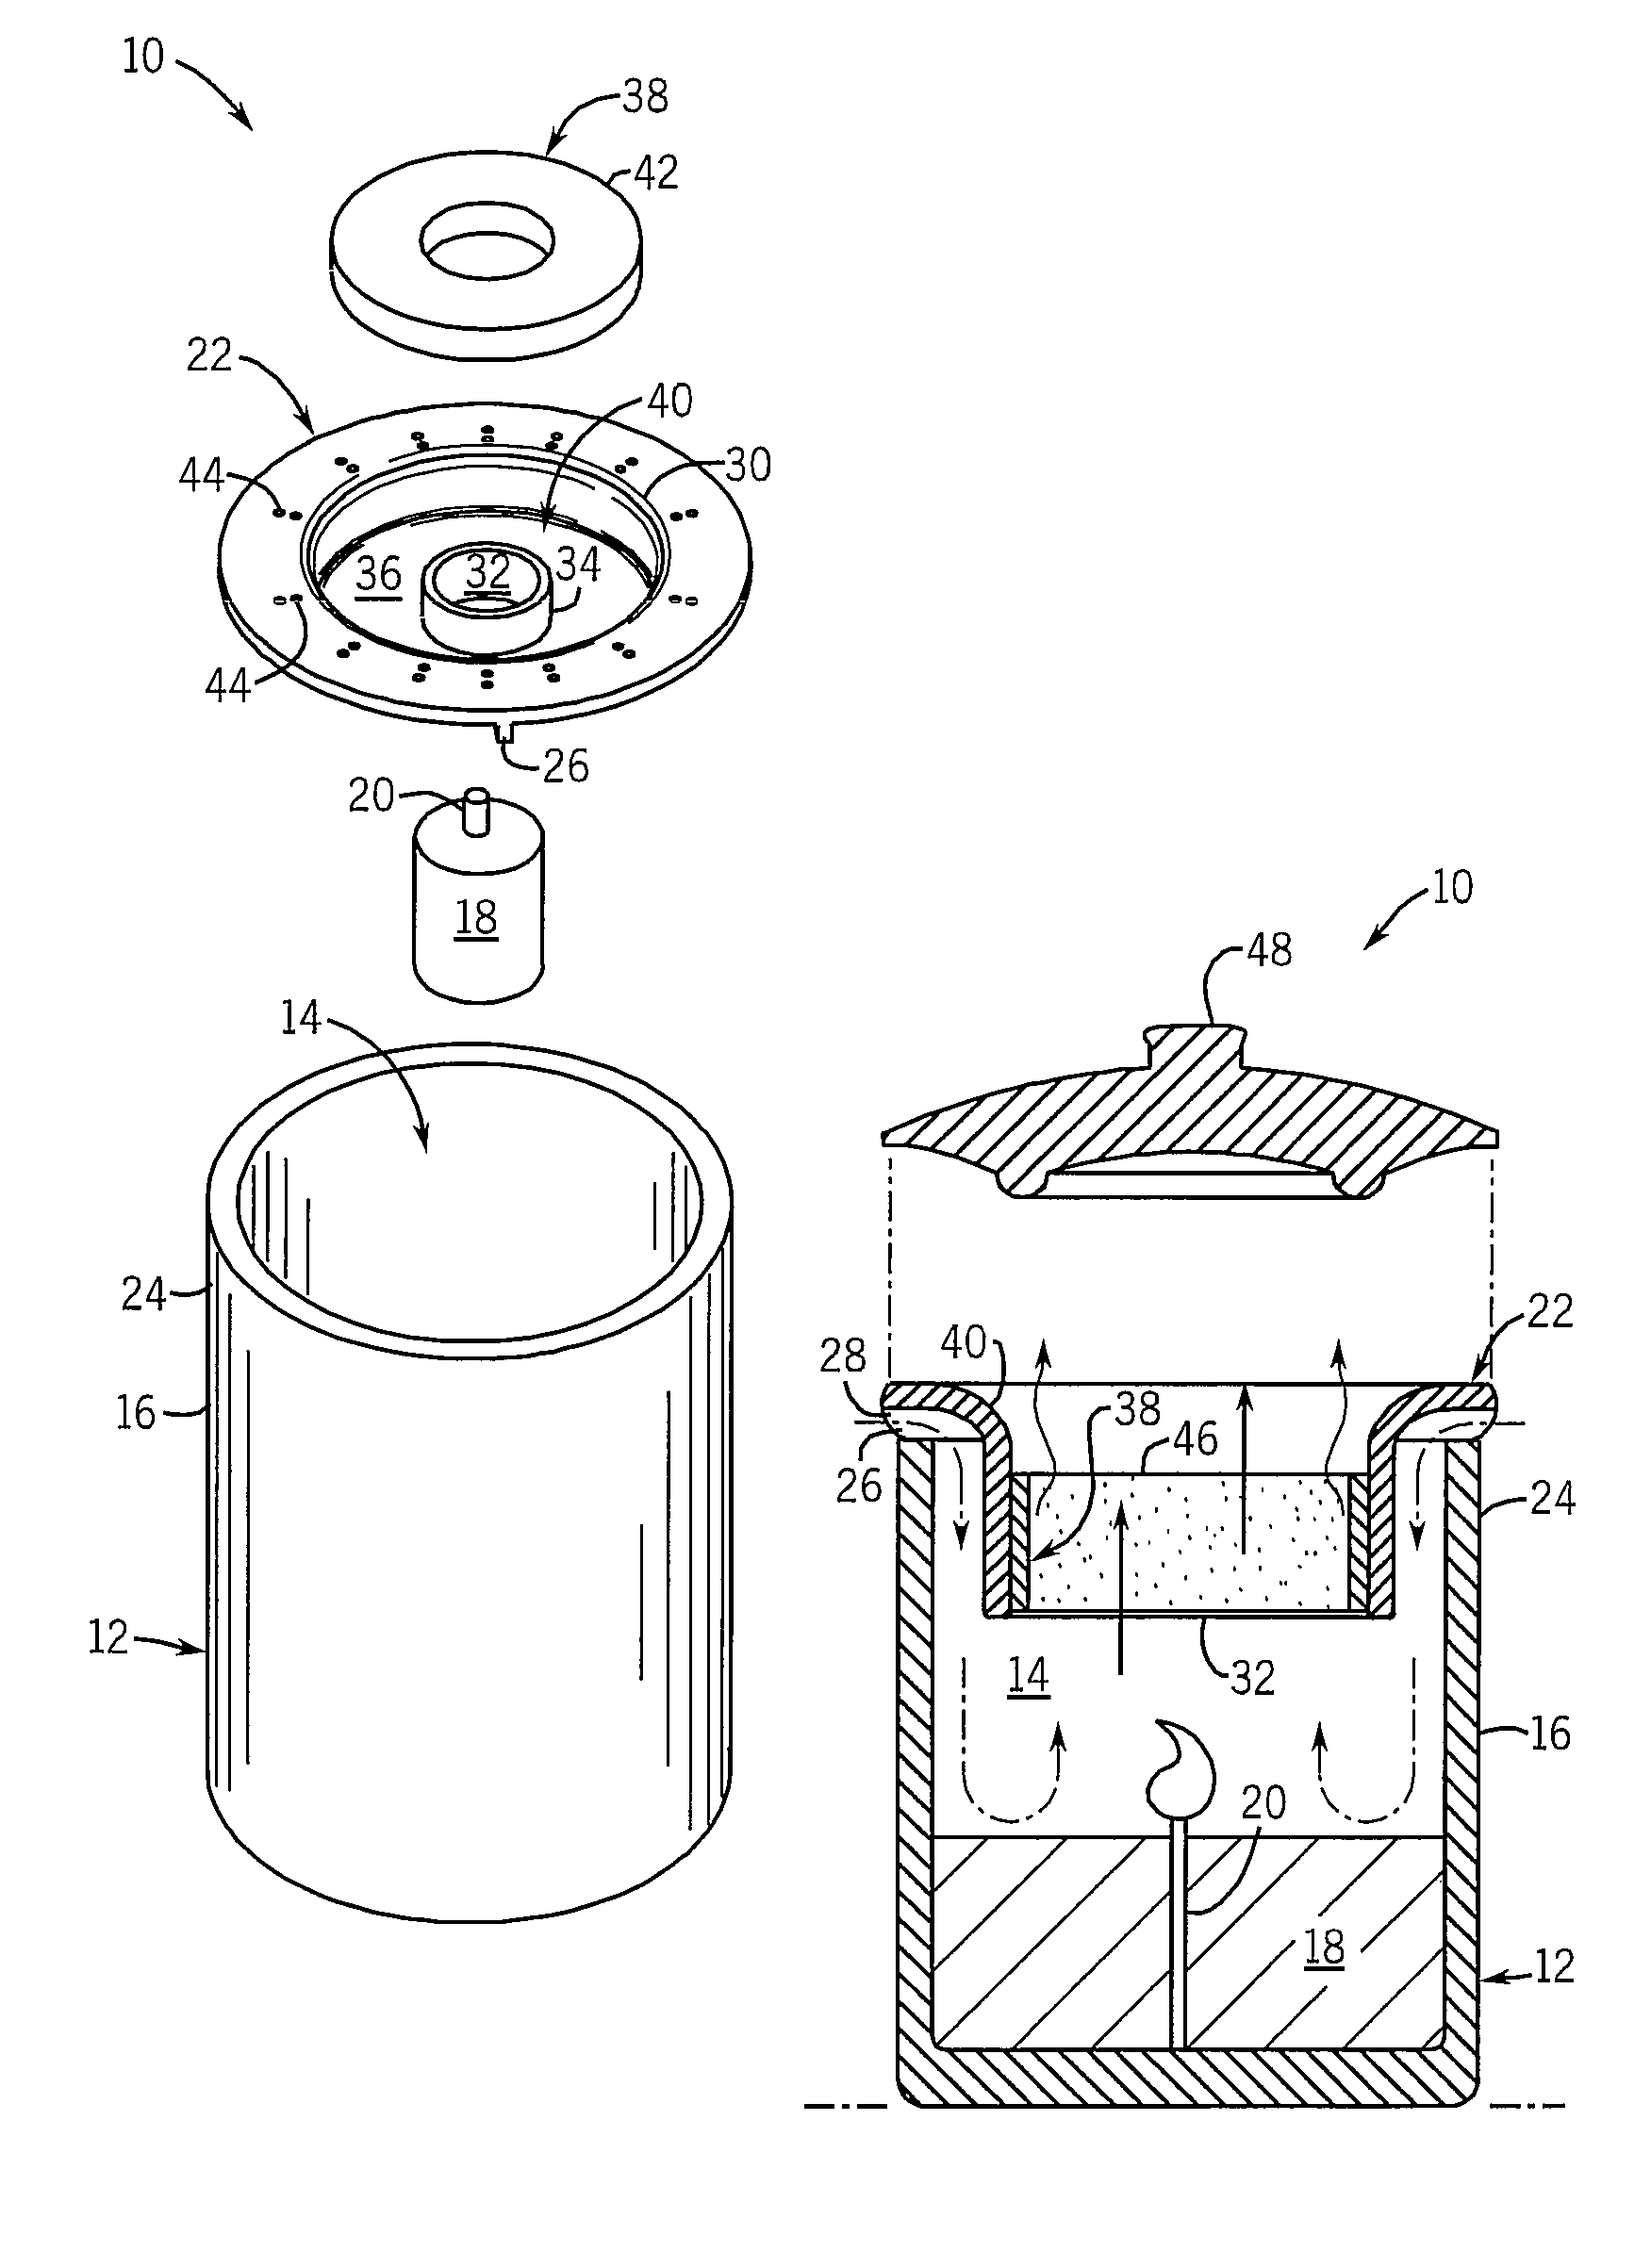 Candle with lid for dispensing an air treatment chemical